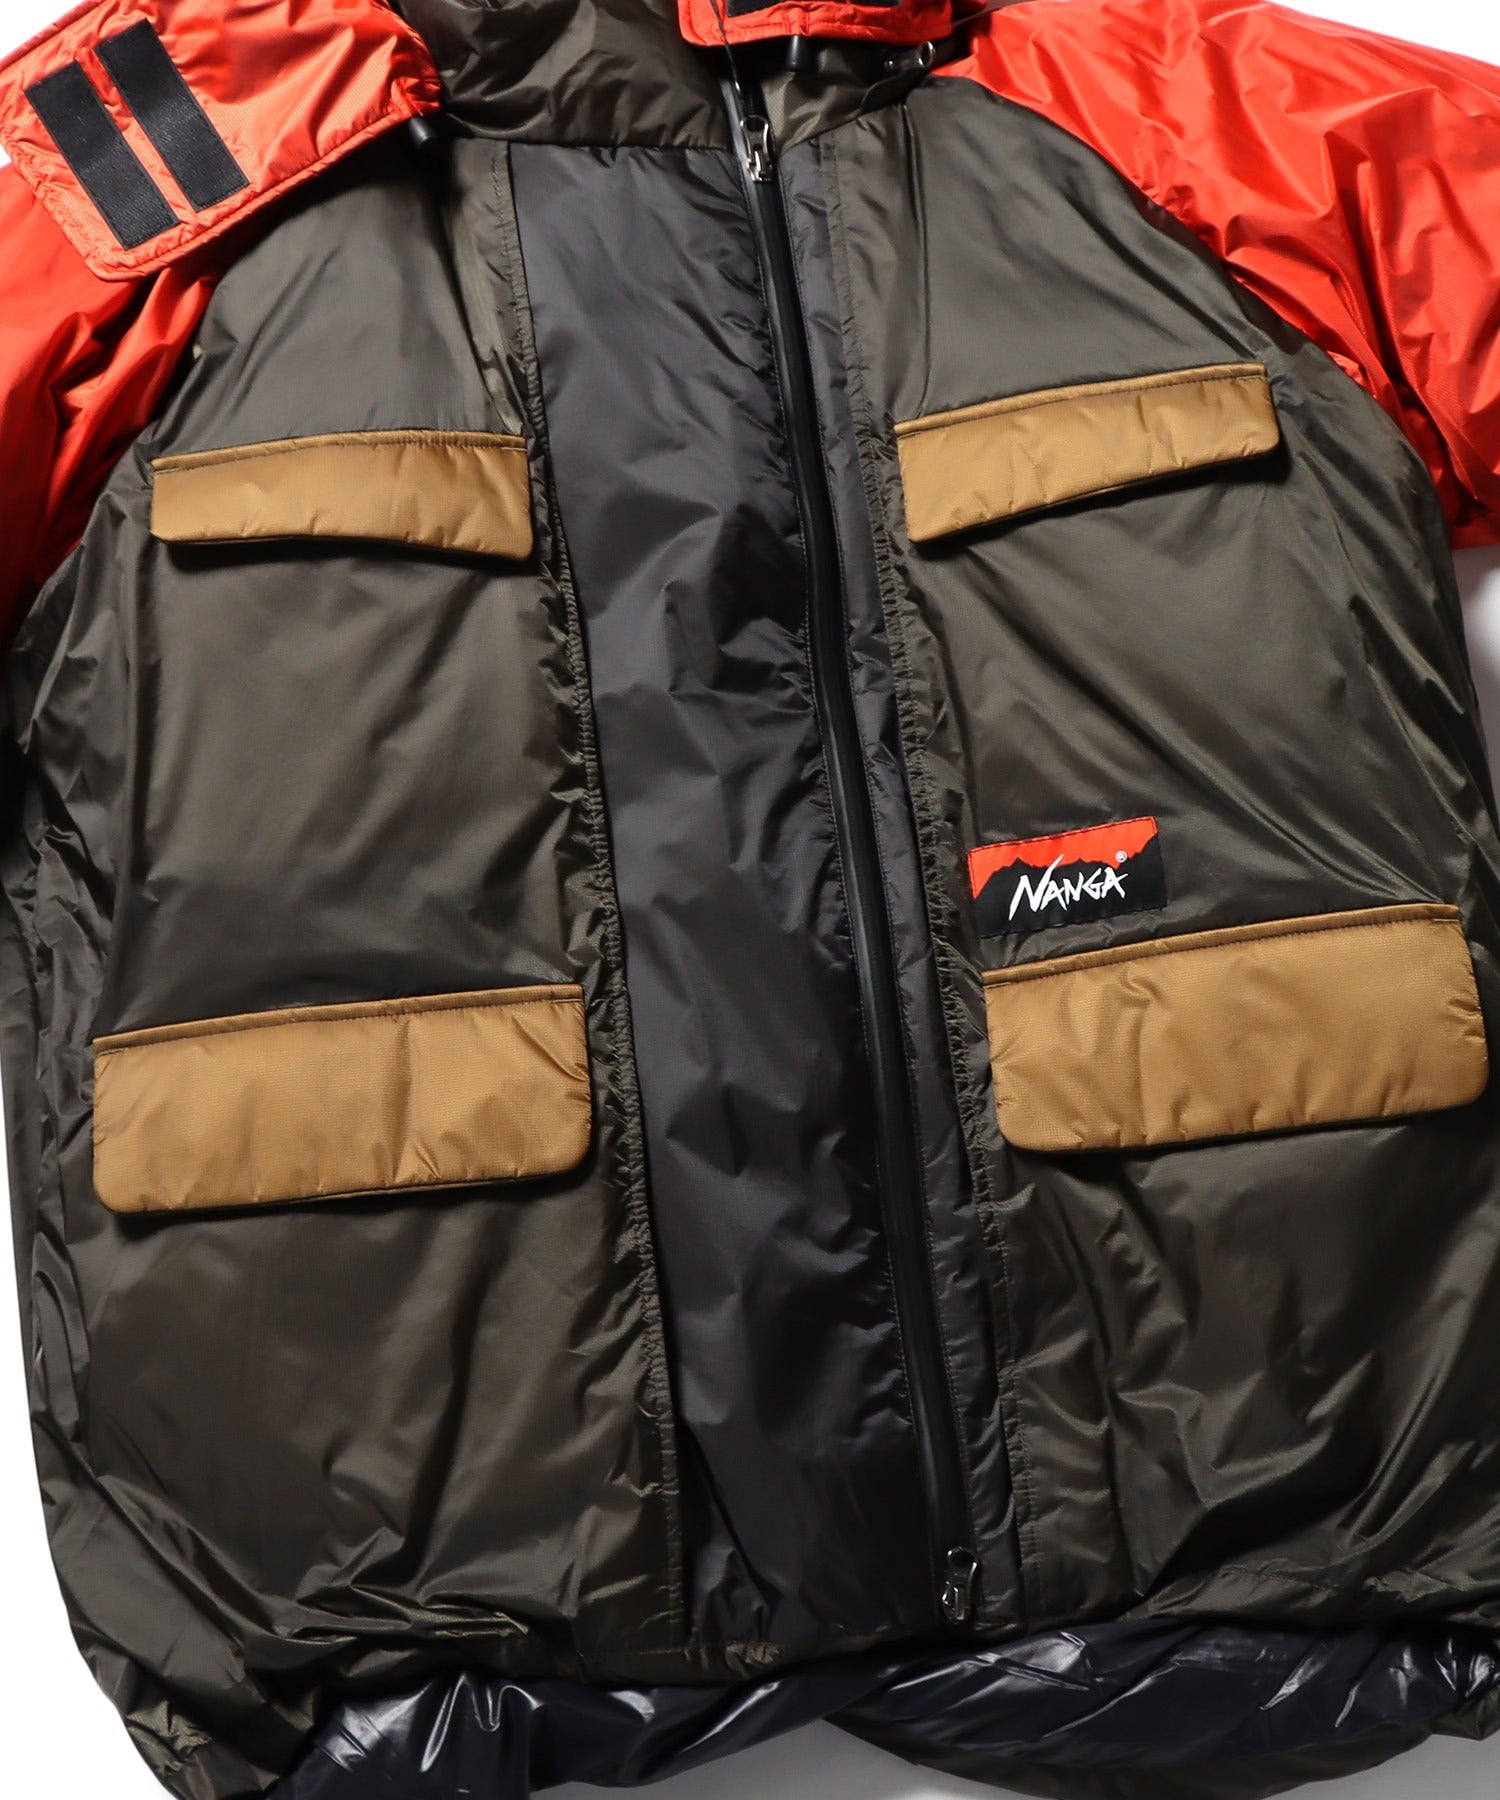 LEVEL7 DIGNITY DOWN JACKET